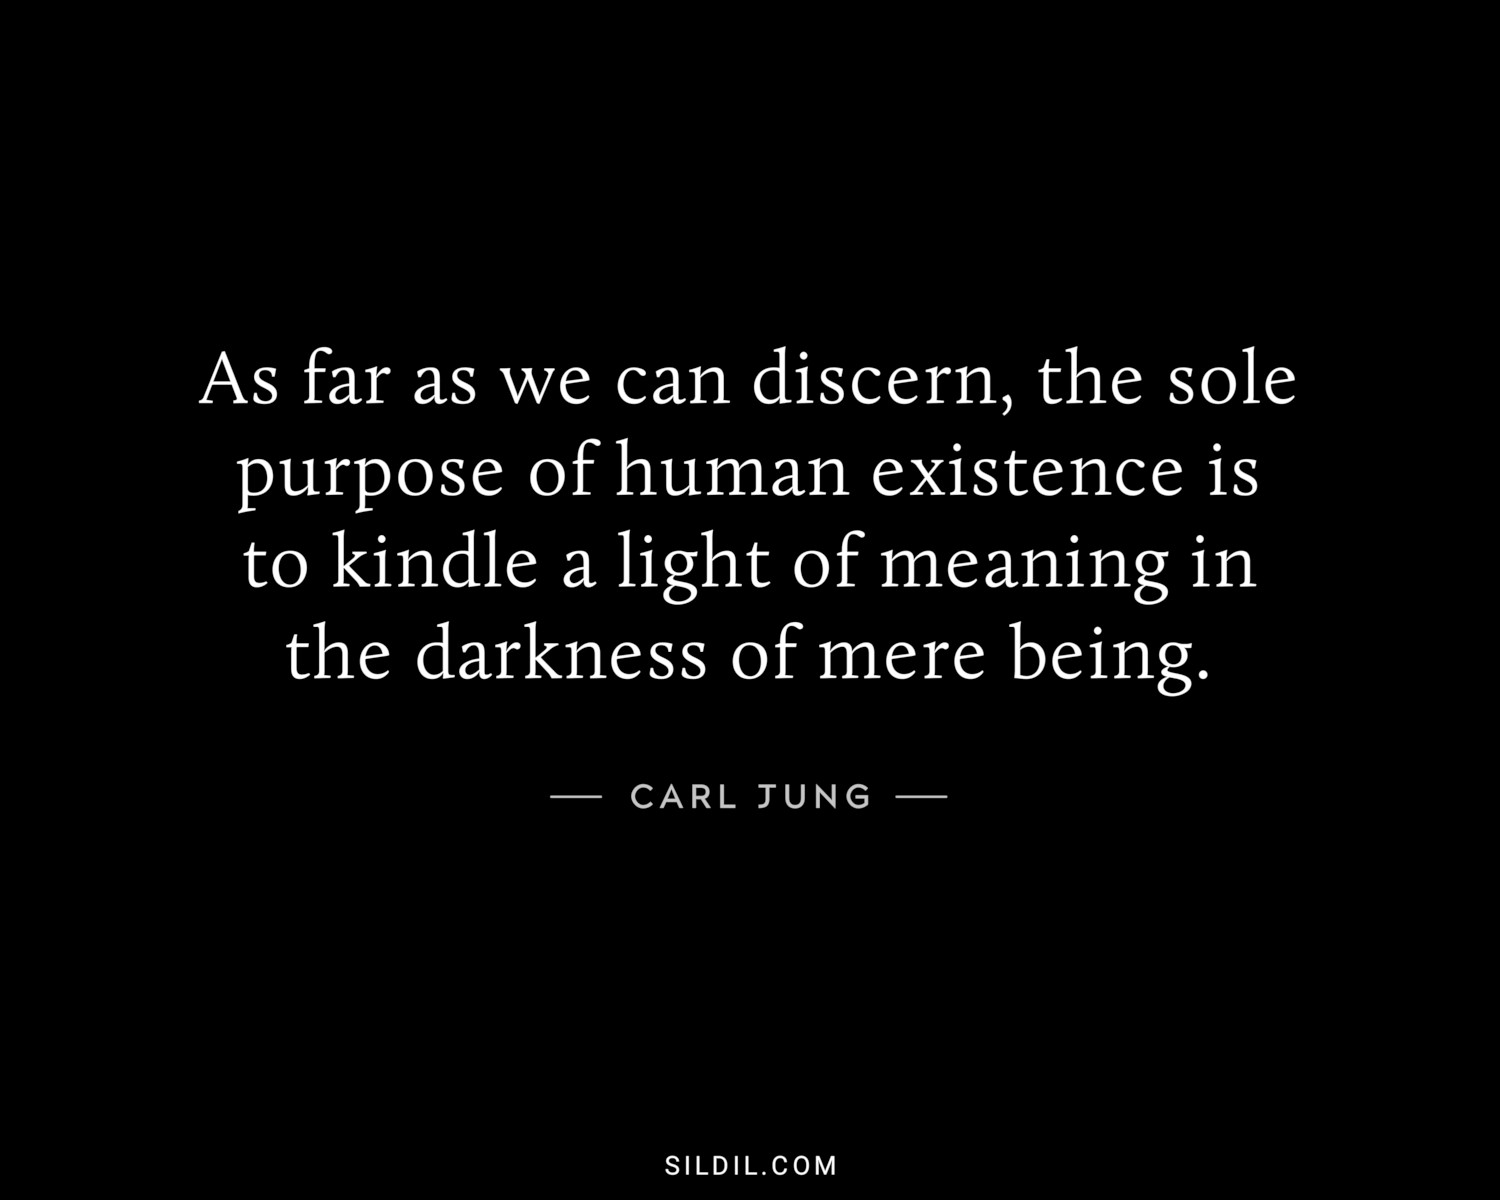 As far as we can discern, the sole purpose of human existence is to kindle a light of meaning in the darkness of mere being.